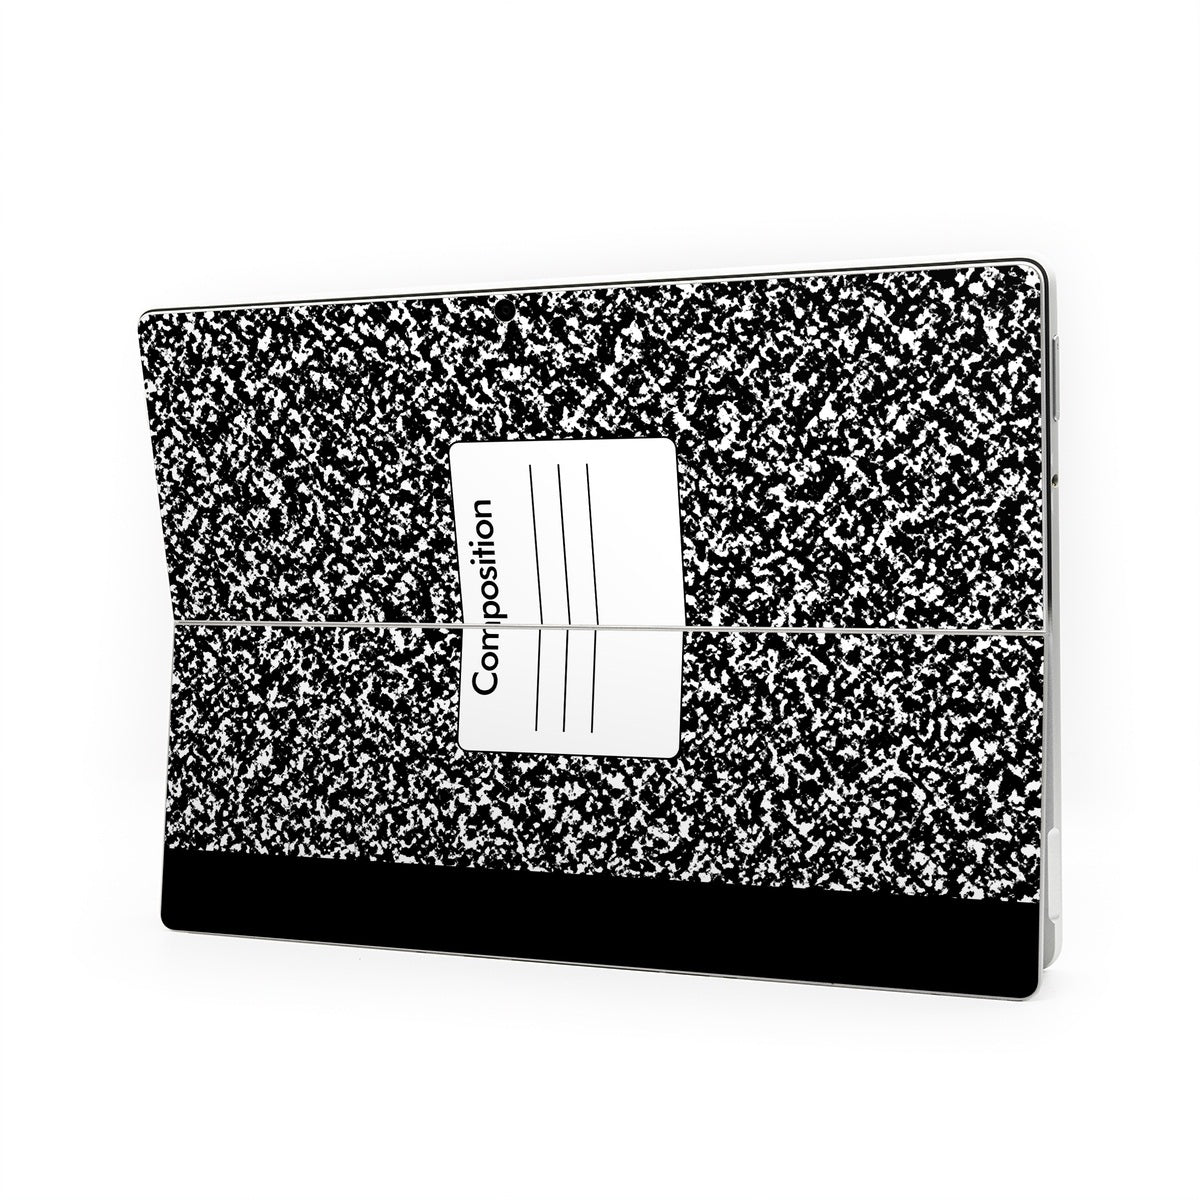 Composition Notebook - Microsoft Surface Pro Skin